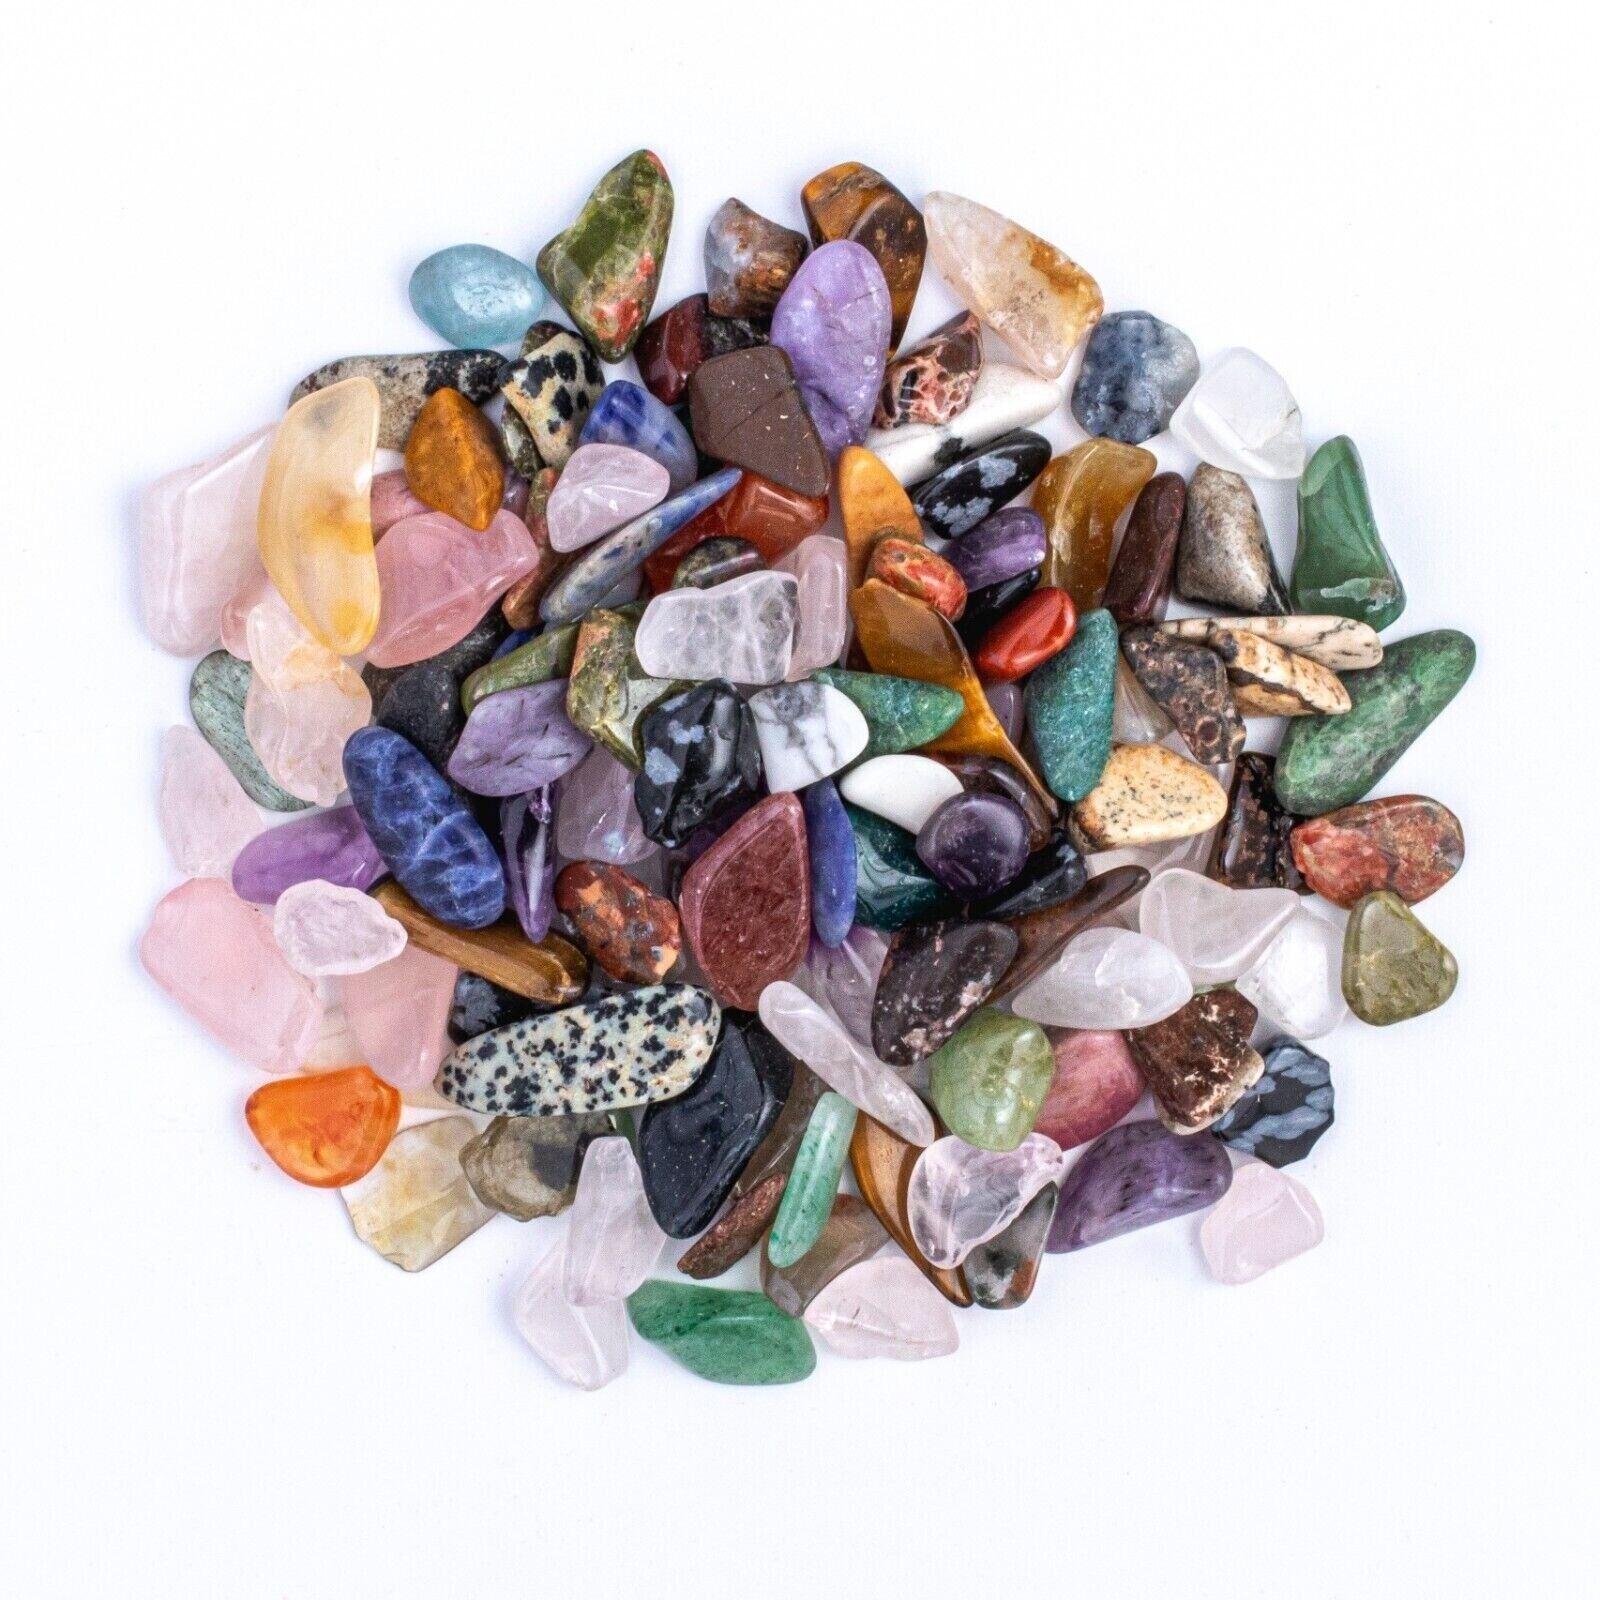 50g Tumbled South Africa Assorted Mix Mini Gemstone Chips Crystal Pebbles Gems